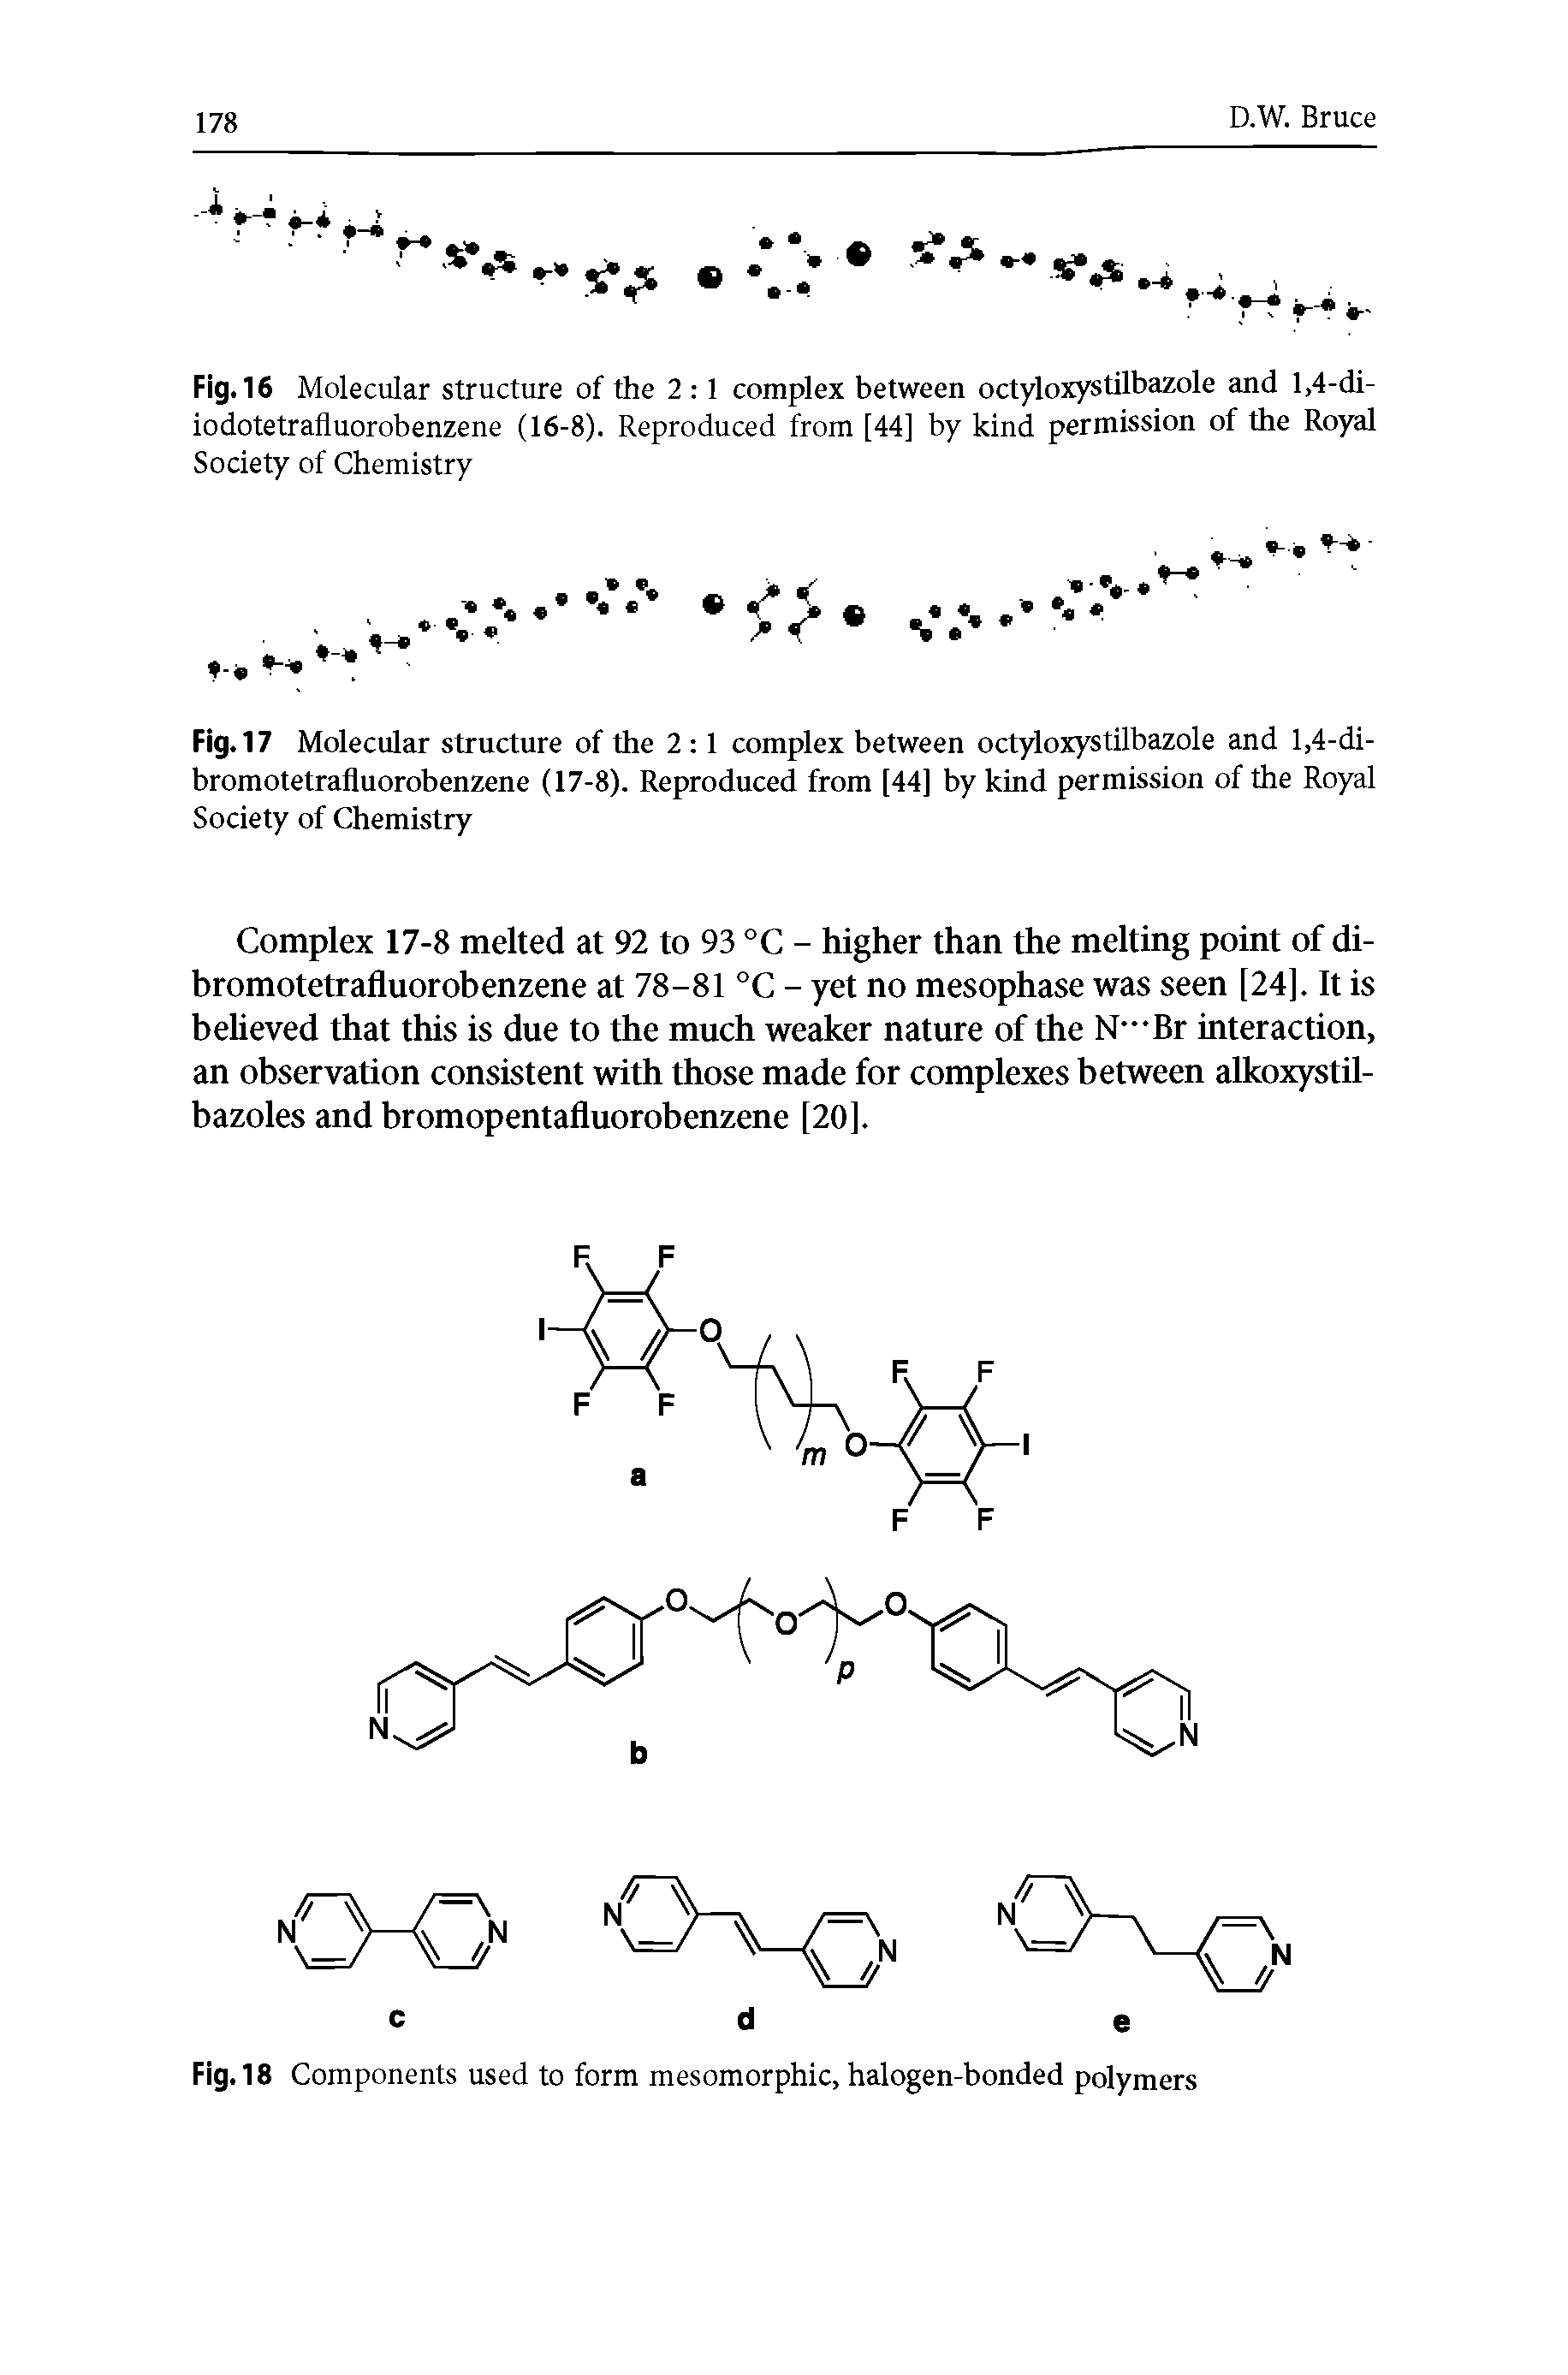 Fig. 18 Components used to form mesomorphic, halogen-bonded polymers...